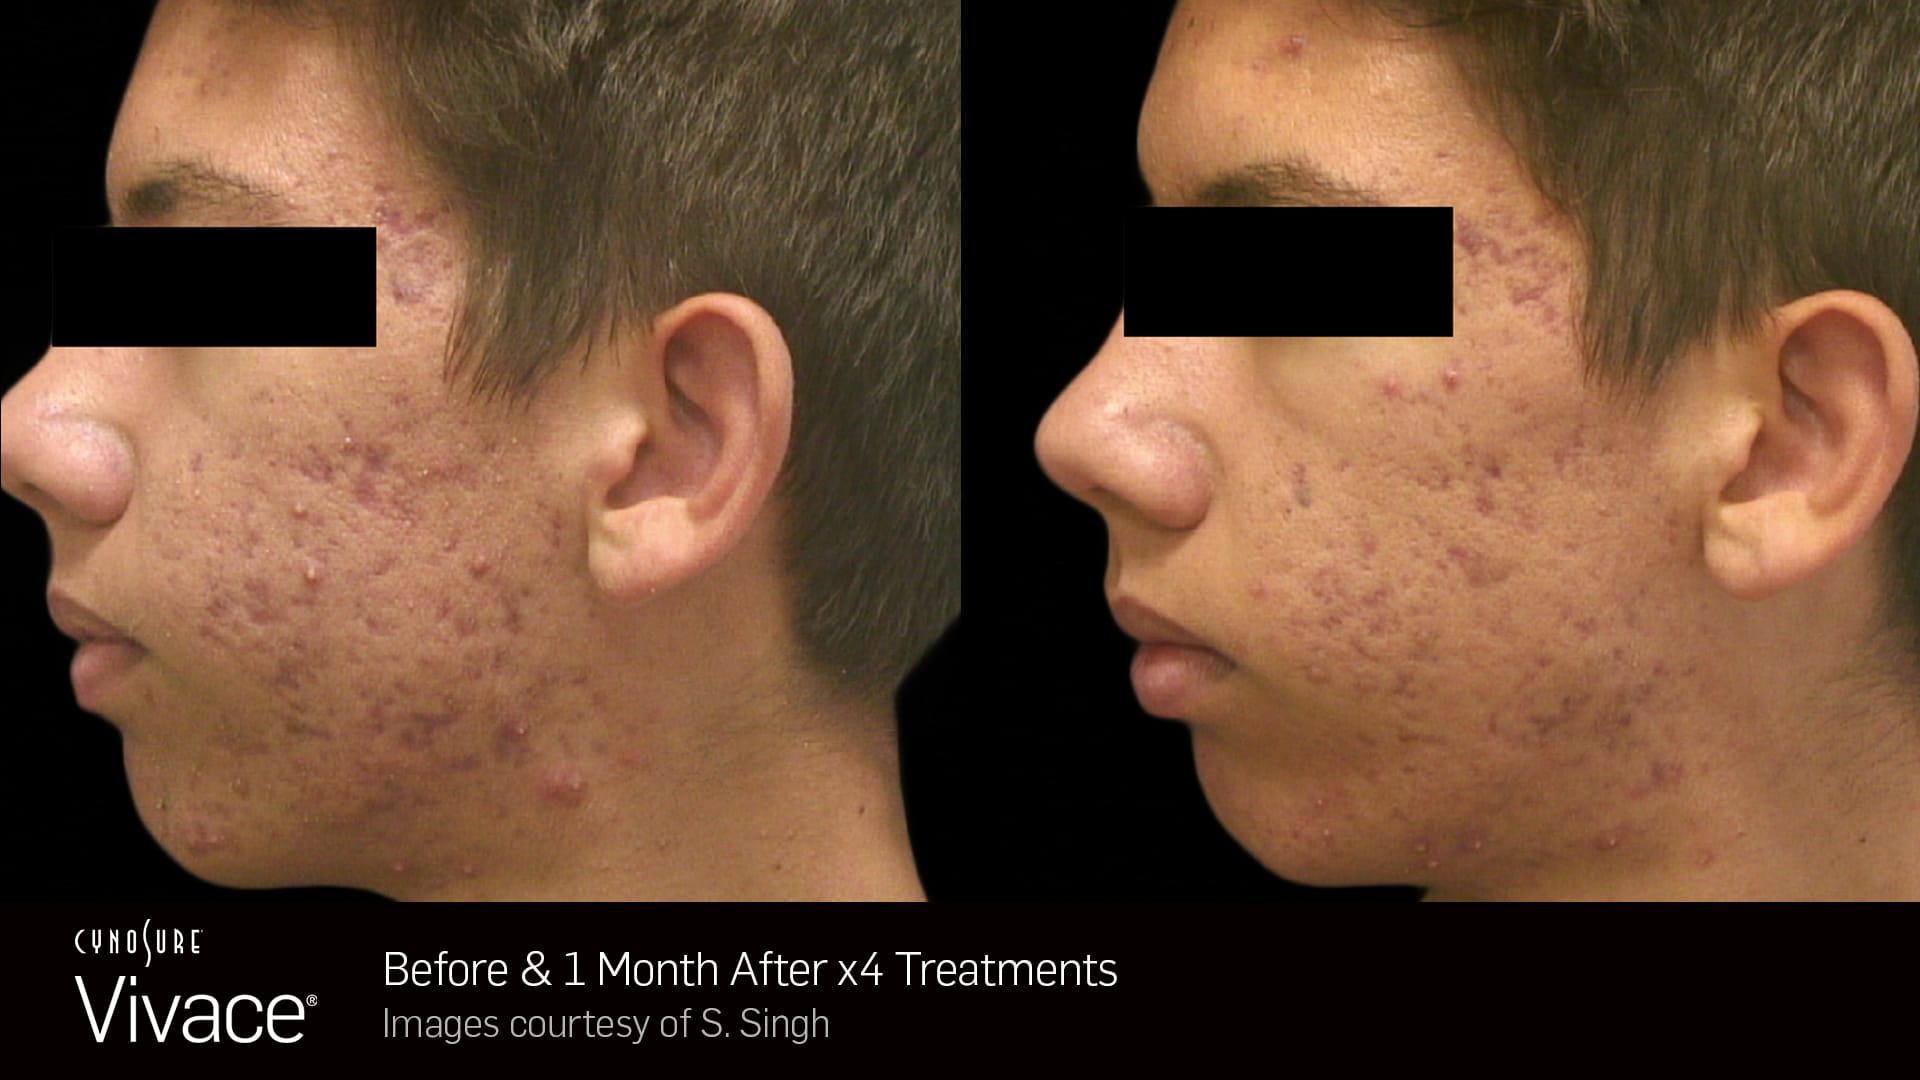 Vivace Treatment Before and After - Bioscor International